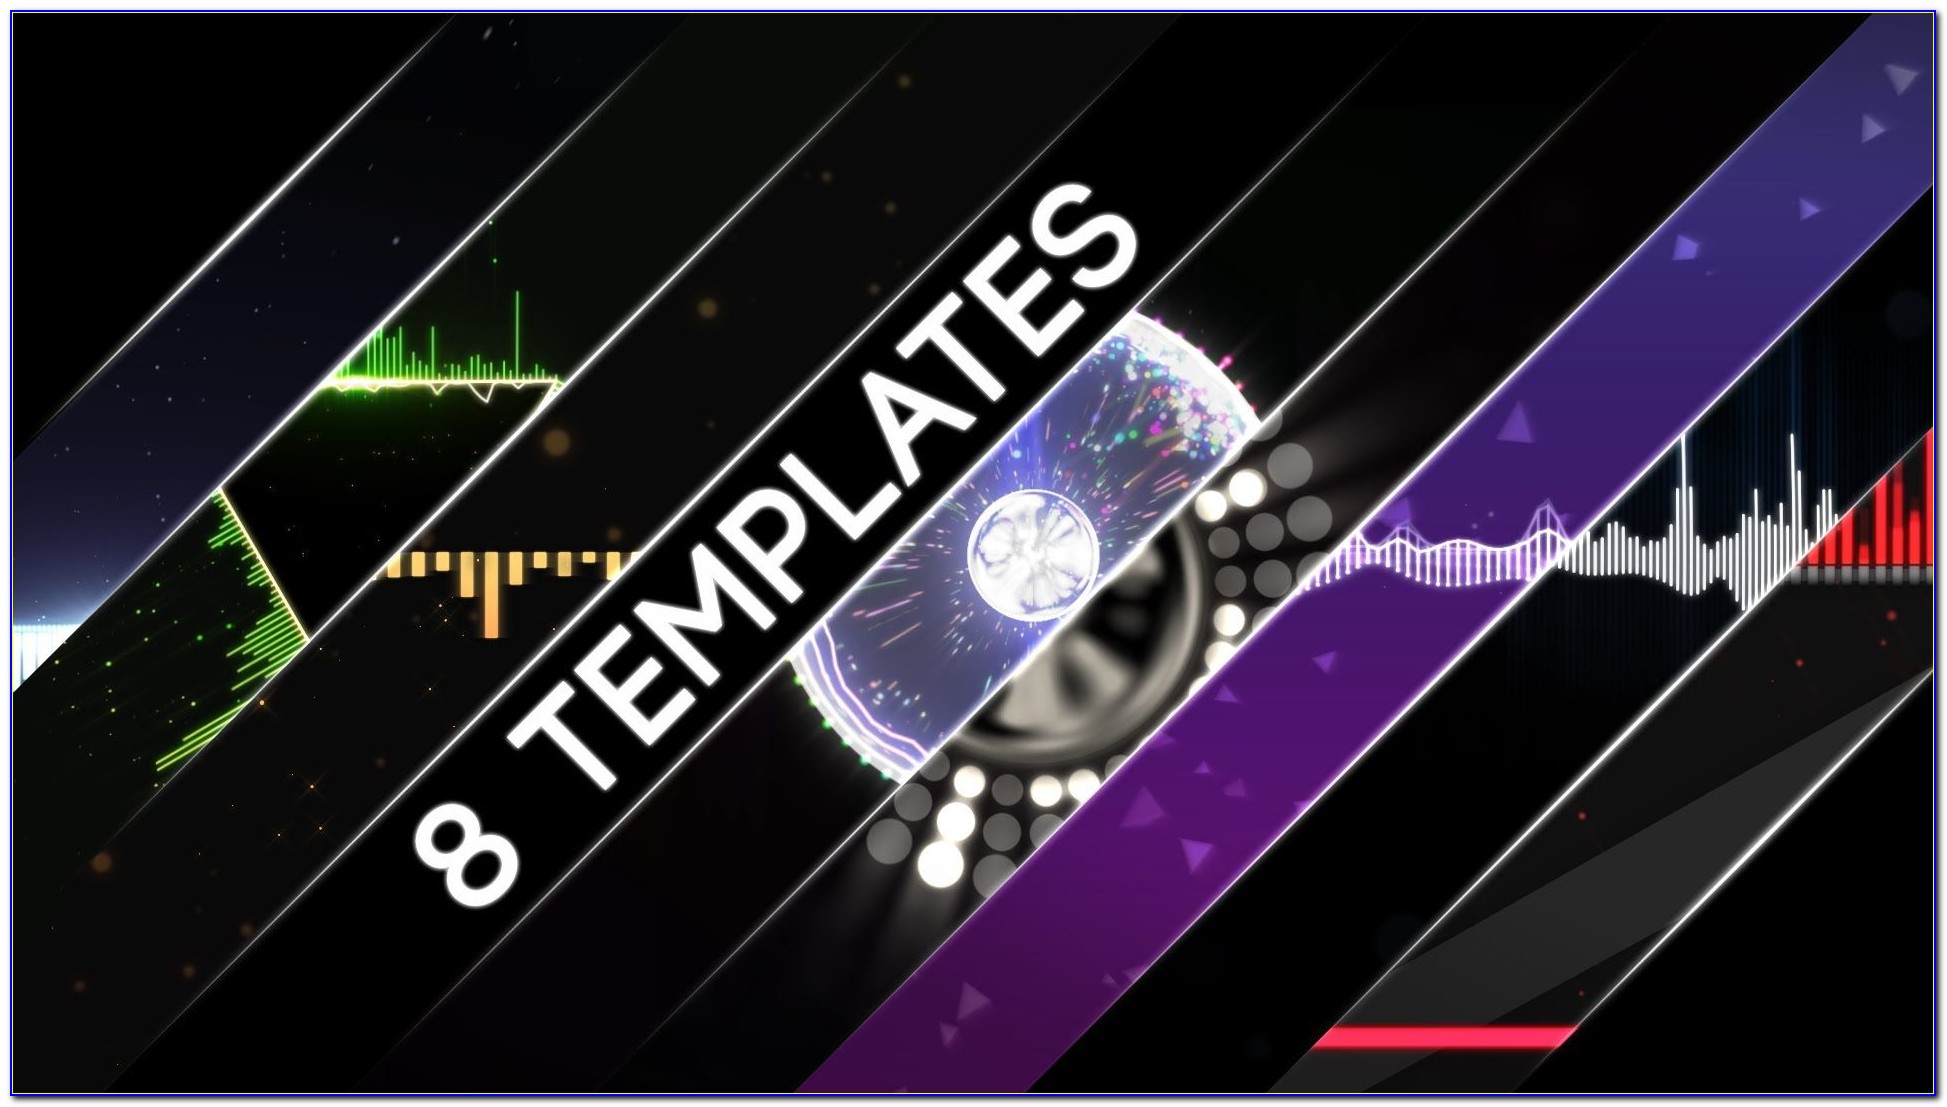 After Effects Templates Free Download Cs5.5